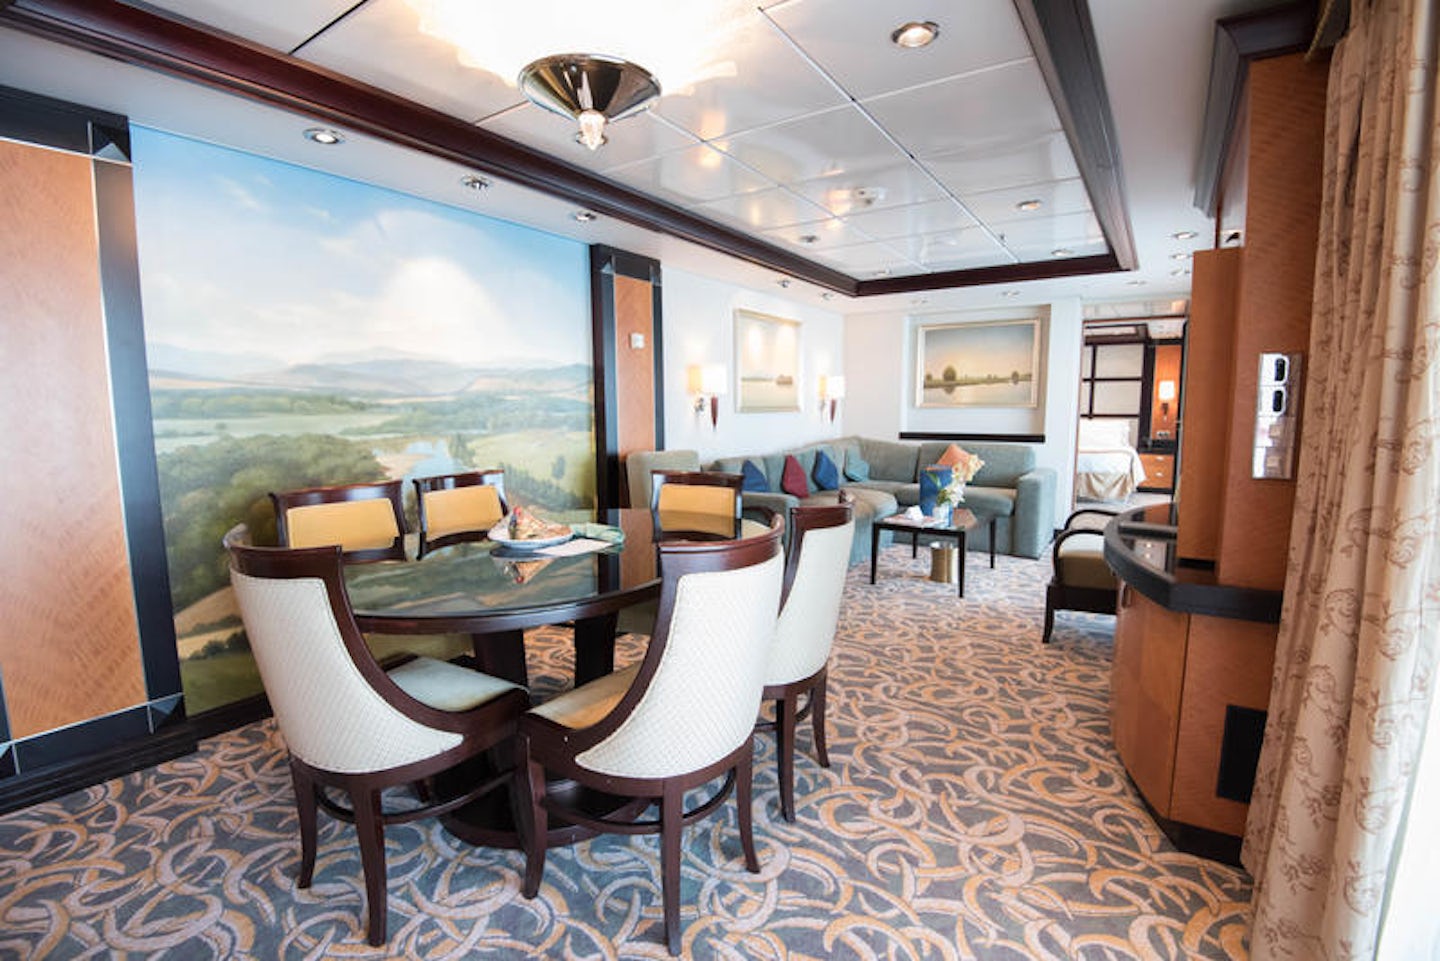 presidential suite cruise ship cost